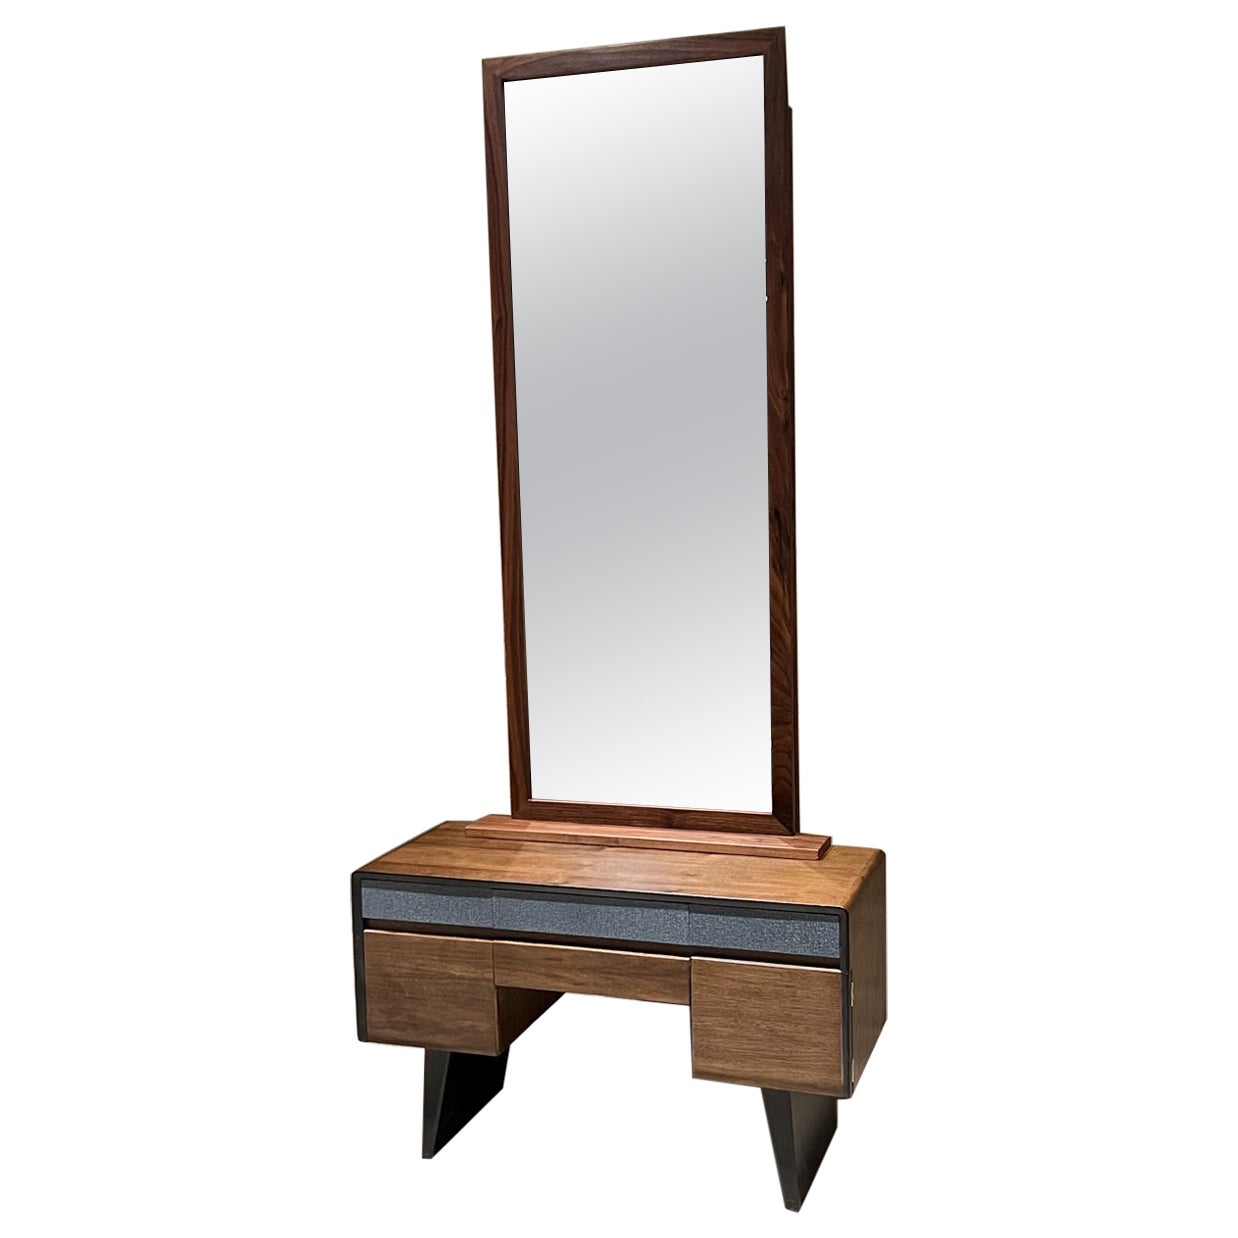 1960s Modern Vanity Set Dressing Table with Mirror